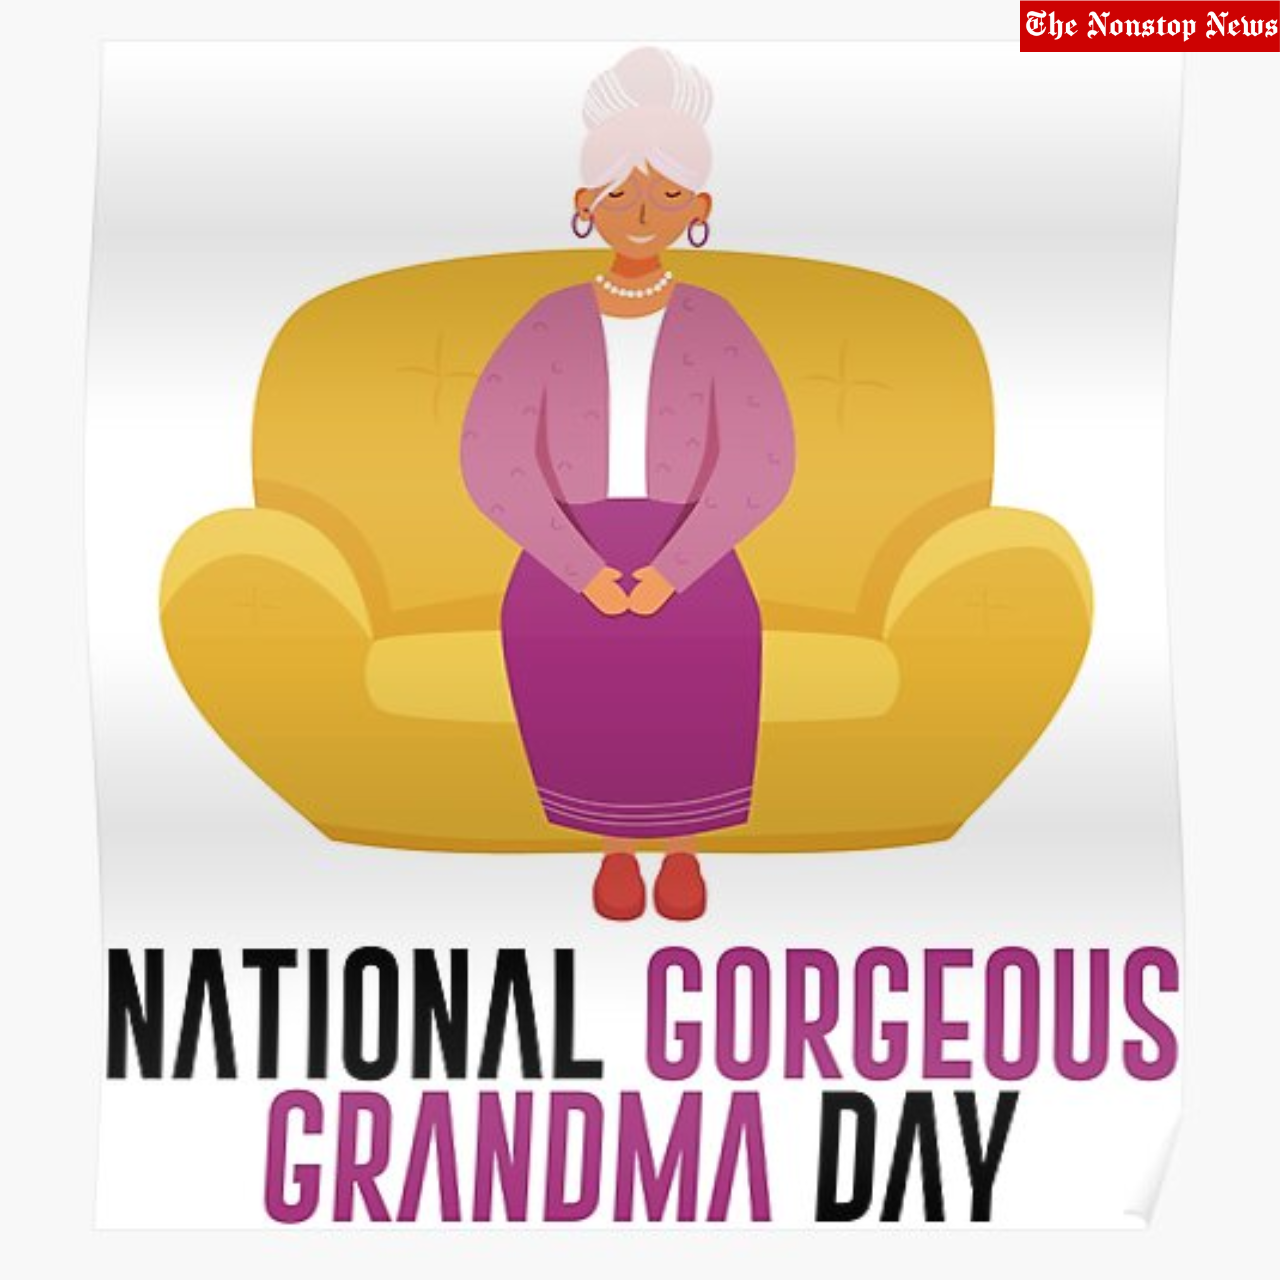 National Gorgeous Grandma Day 2022: Top Images, Captions, Quotes, Greetings, Messages to Share